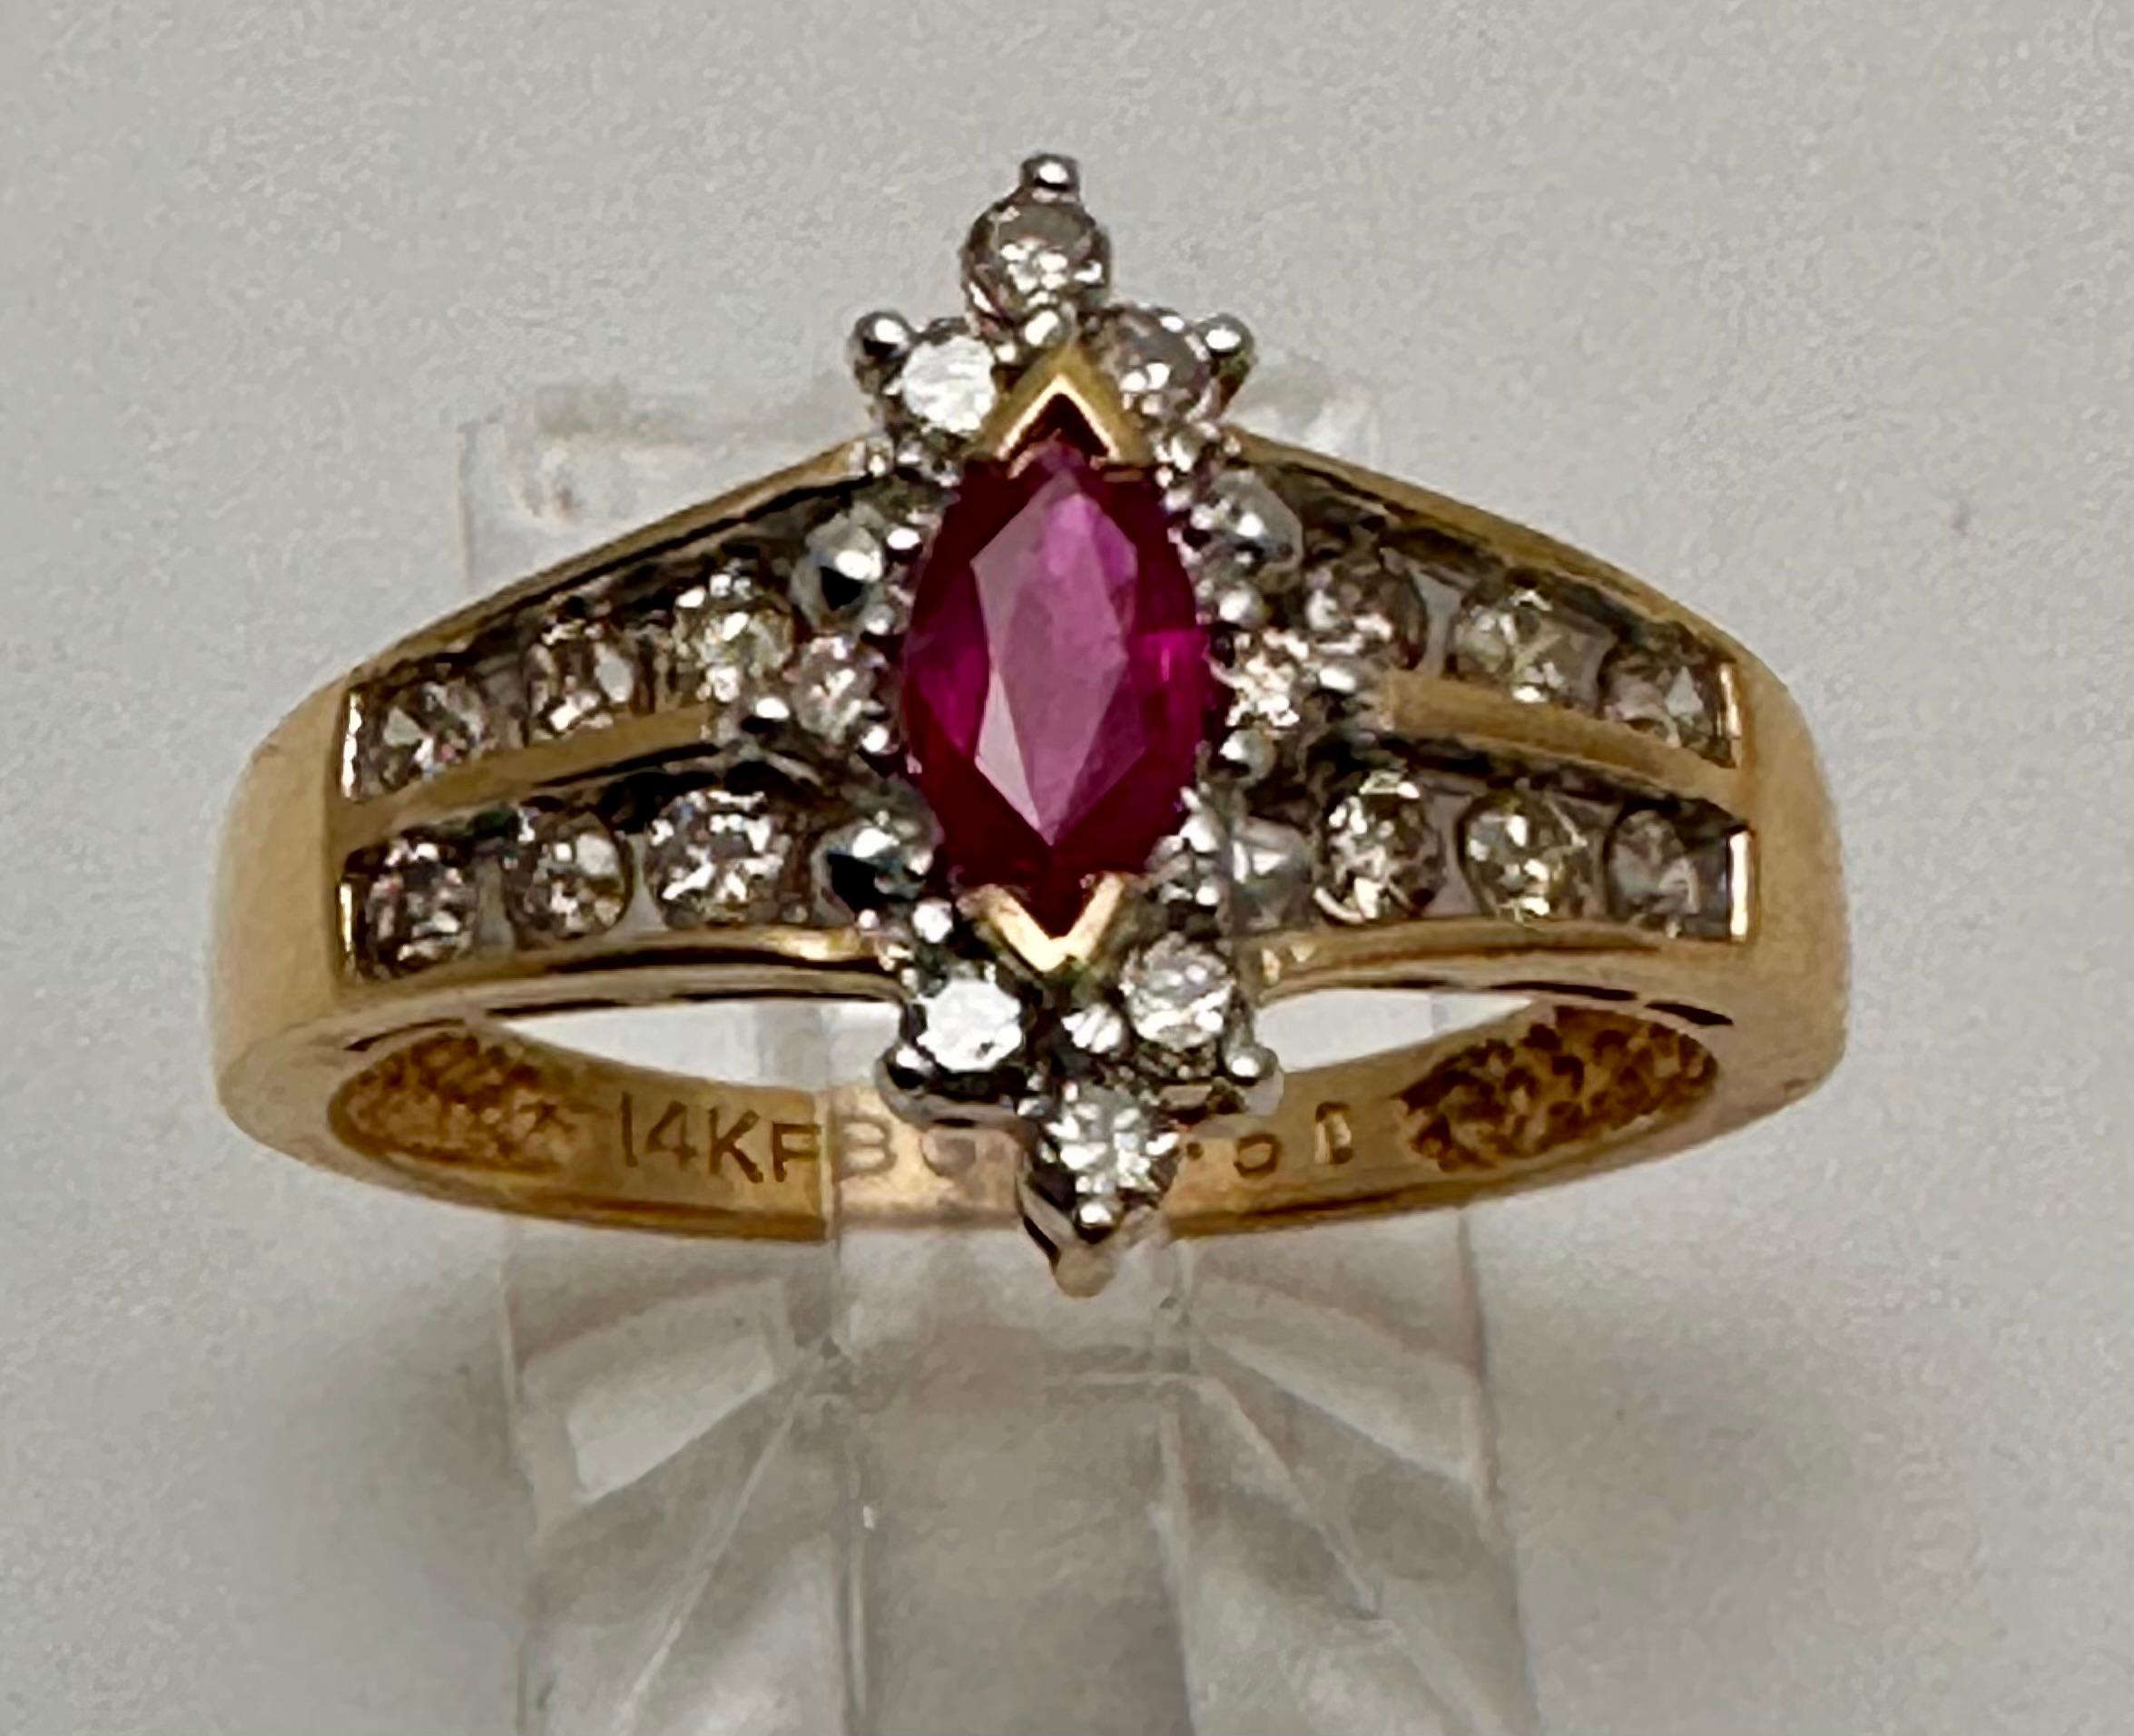 14k Yellow Gold approx. 4mm x 6mm Marquise Ruby .with .50tcw Diamonds Ring Size 7 1/2

Add a touch of elegance to your jewelry collection with this stunning 14k yellow gold ring featuring an approx  4mm x 6mm marquise ruby and .50c of diamonds. The